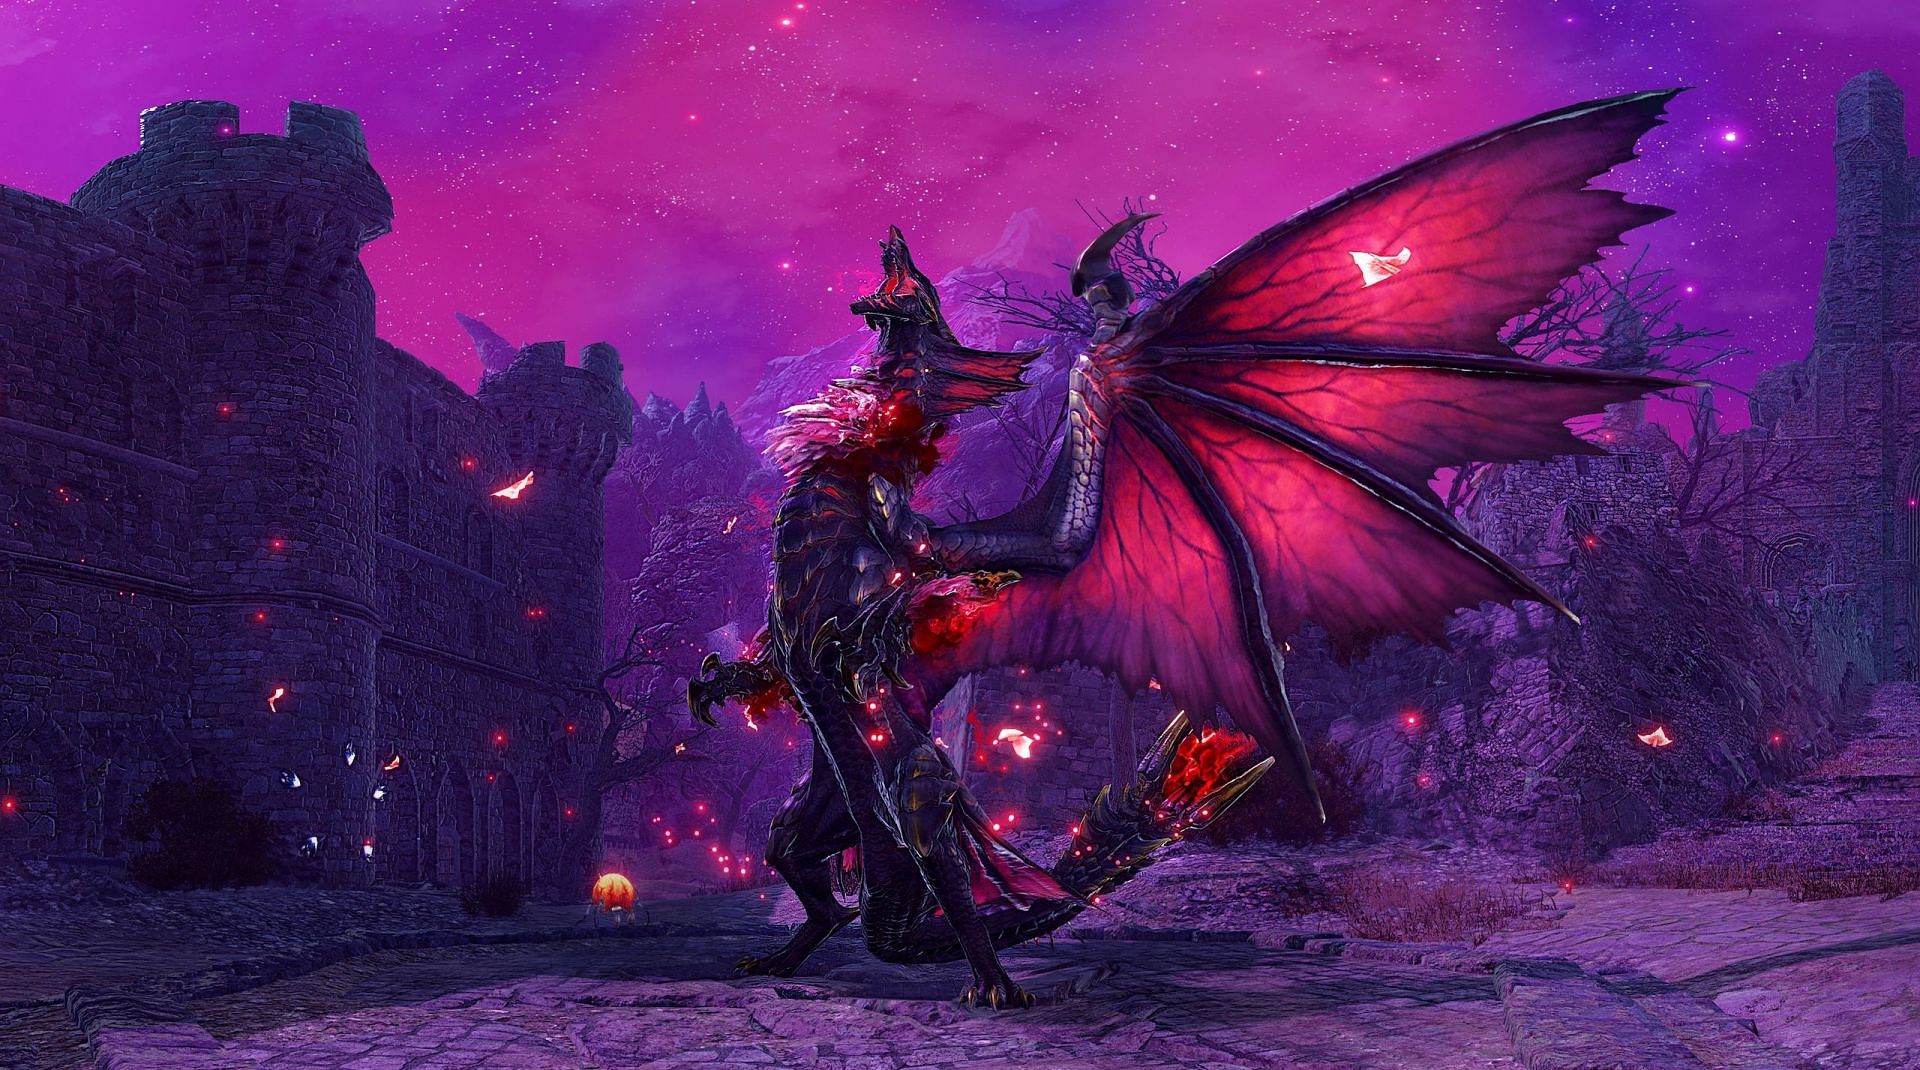 Winged Death (image by Capcom)